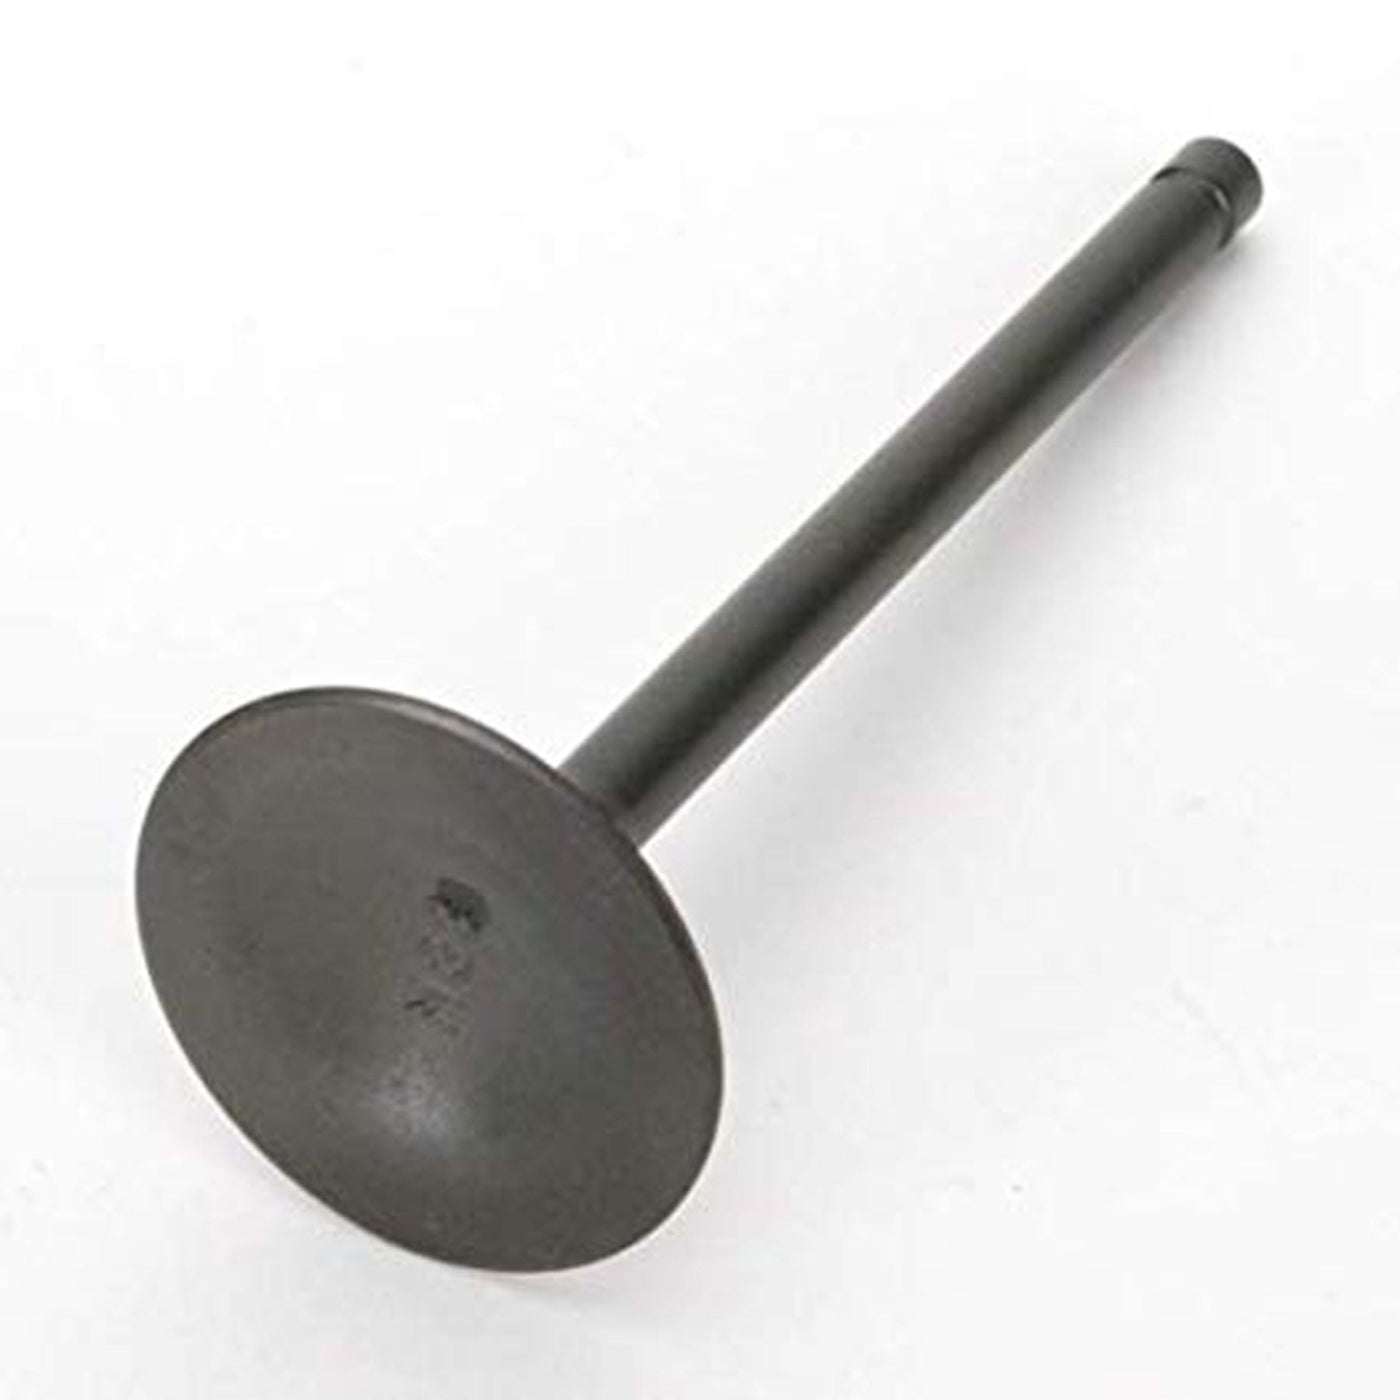 Hotcams 8400032-2 Intake and Exhaust Valves #8400032-2